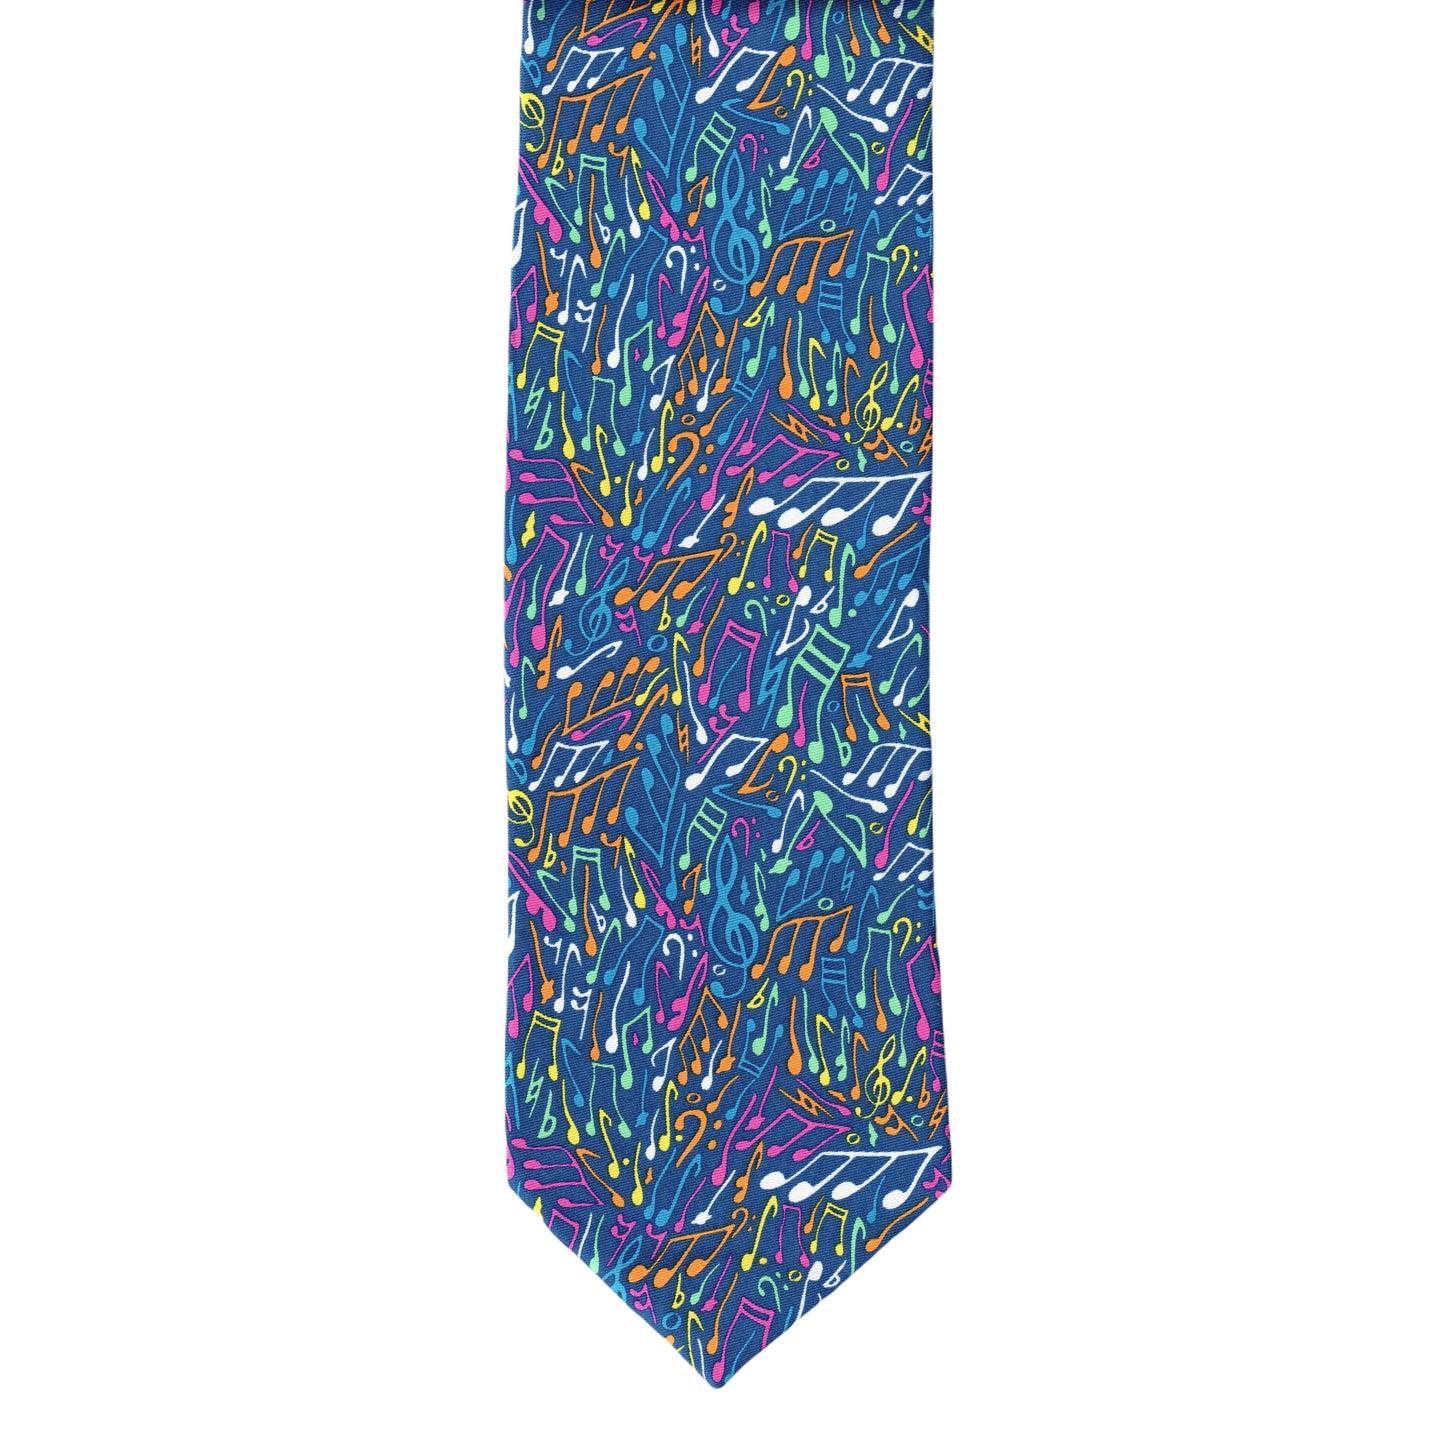 Mellow Melody Tie, Navy